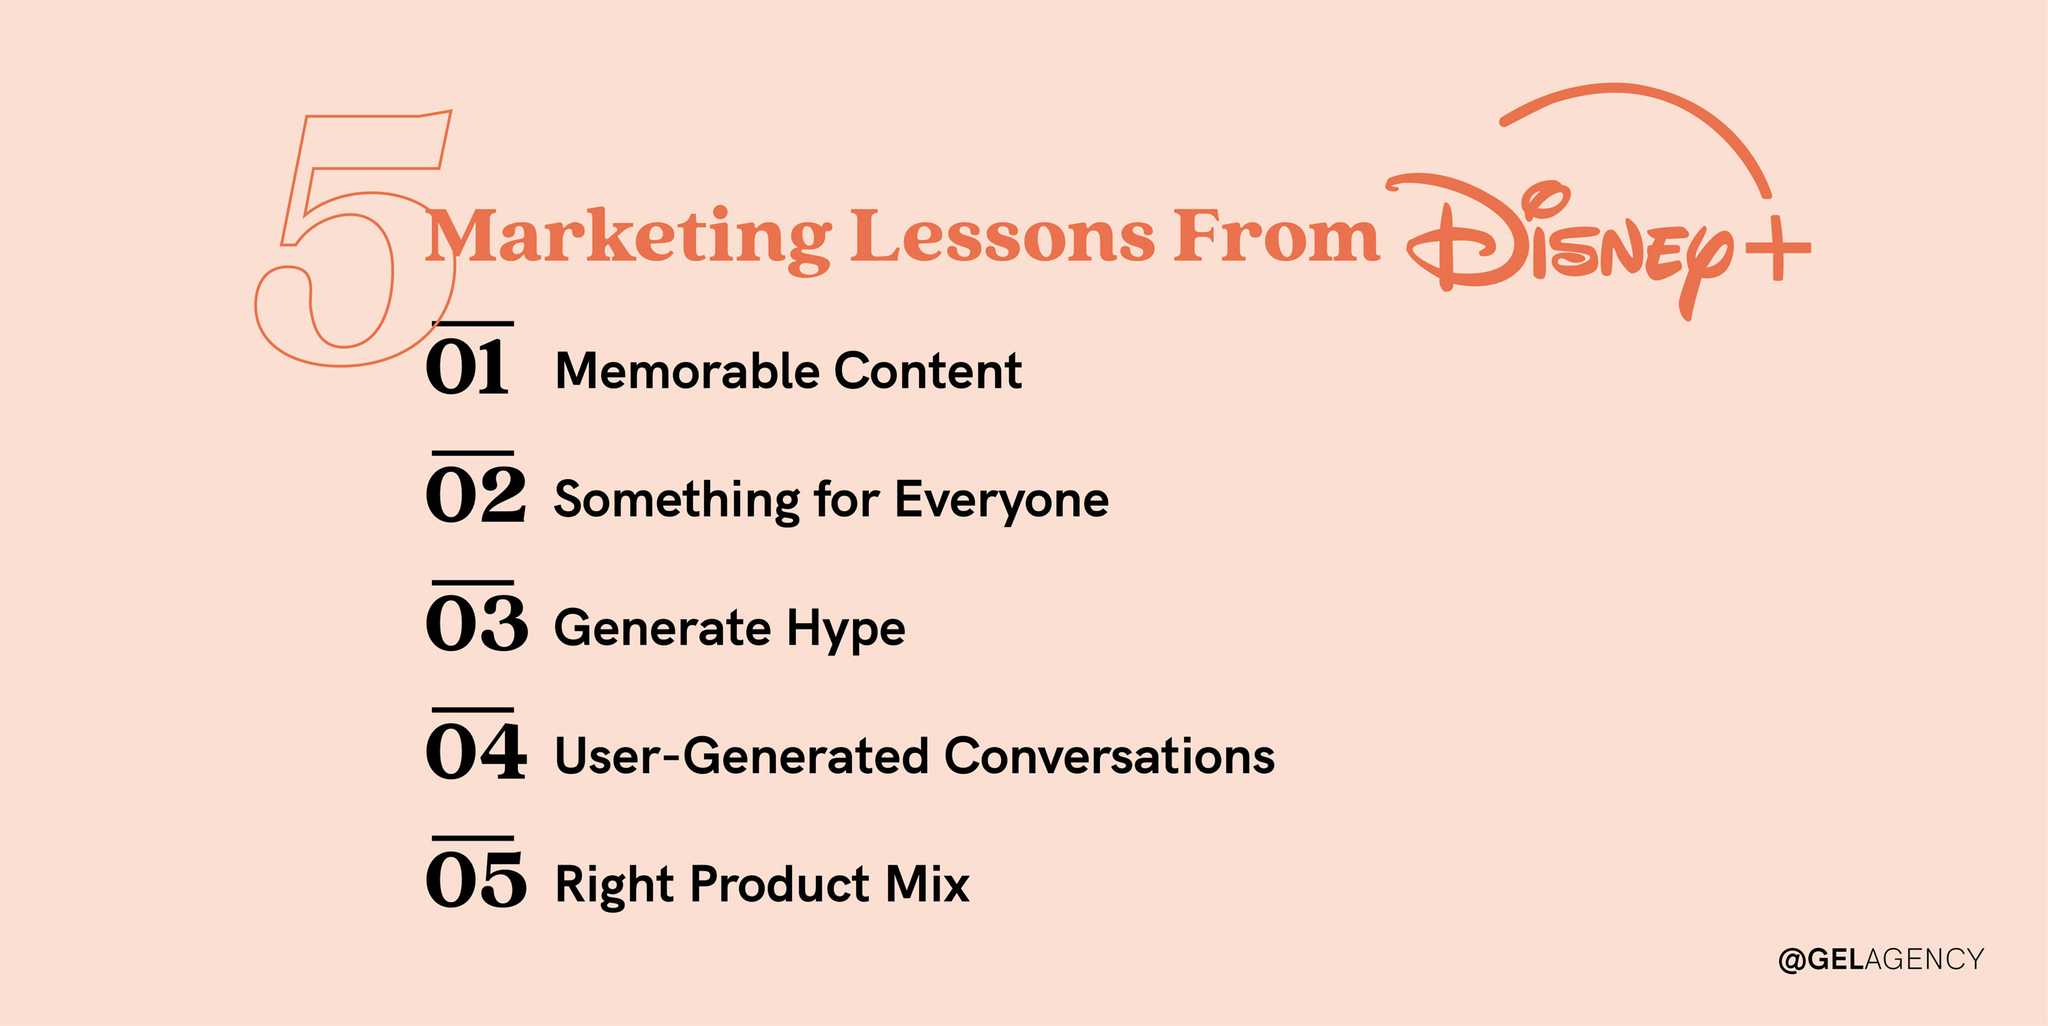 5 Marketing Lessons From Disney+